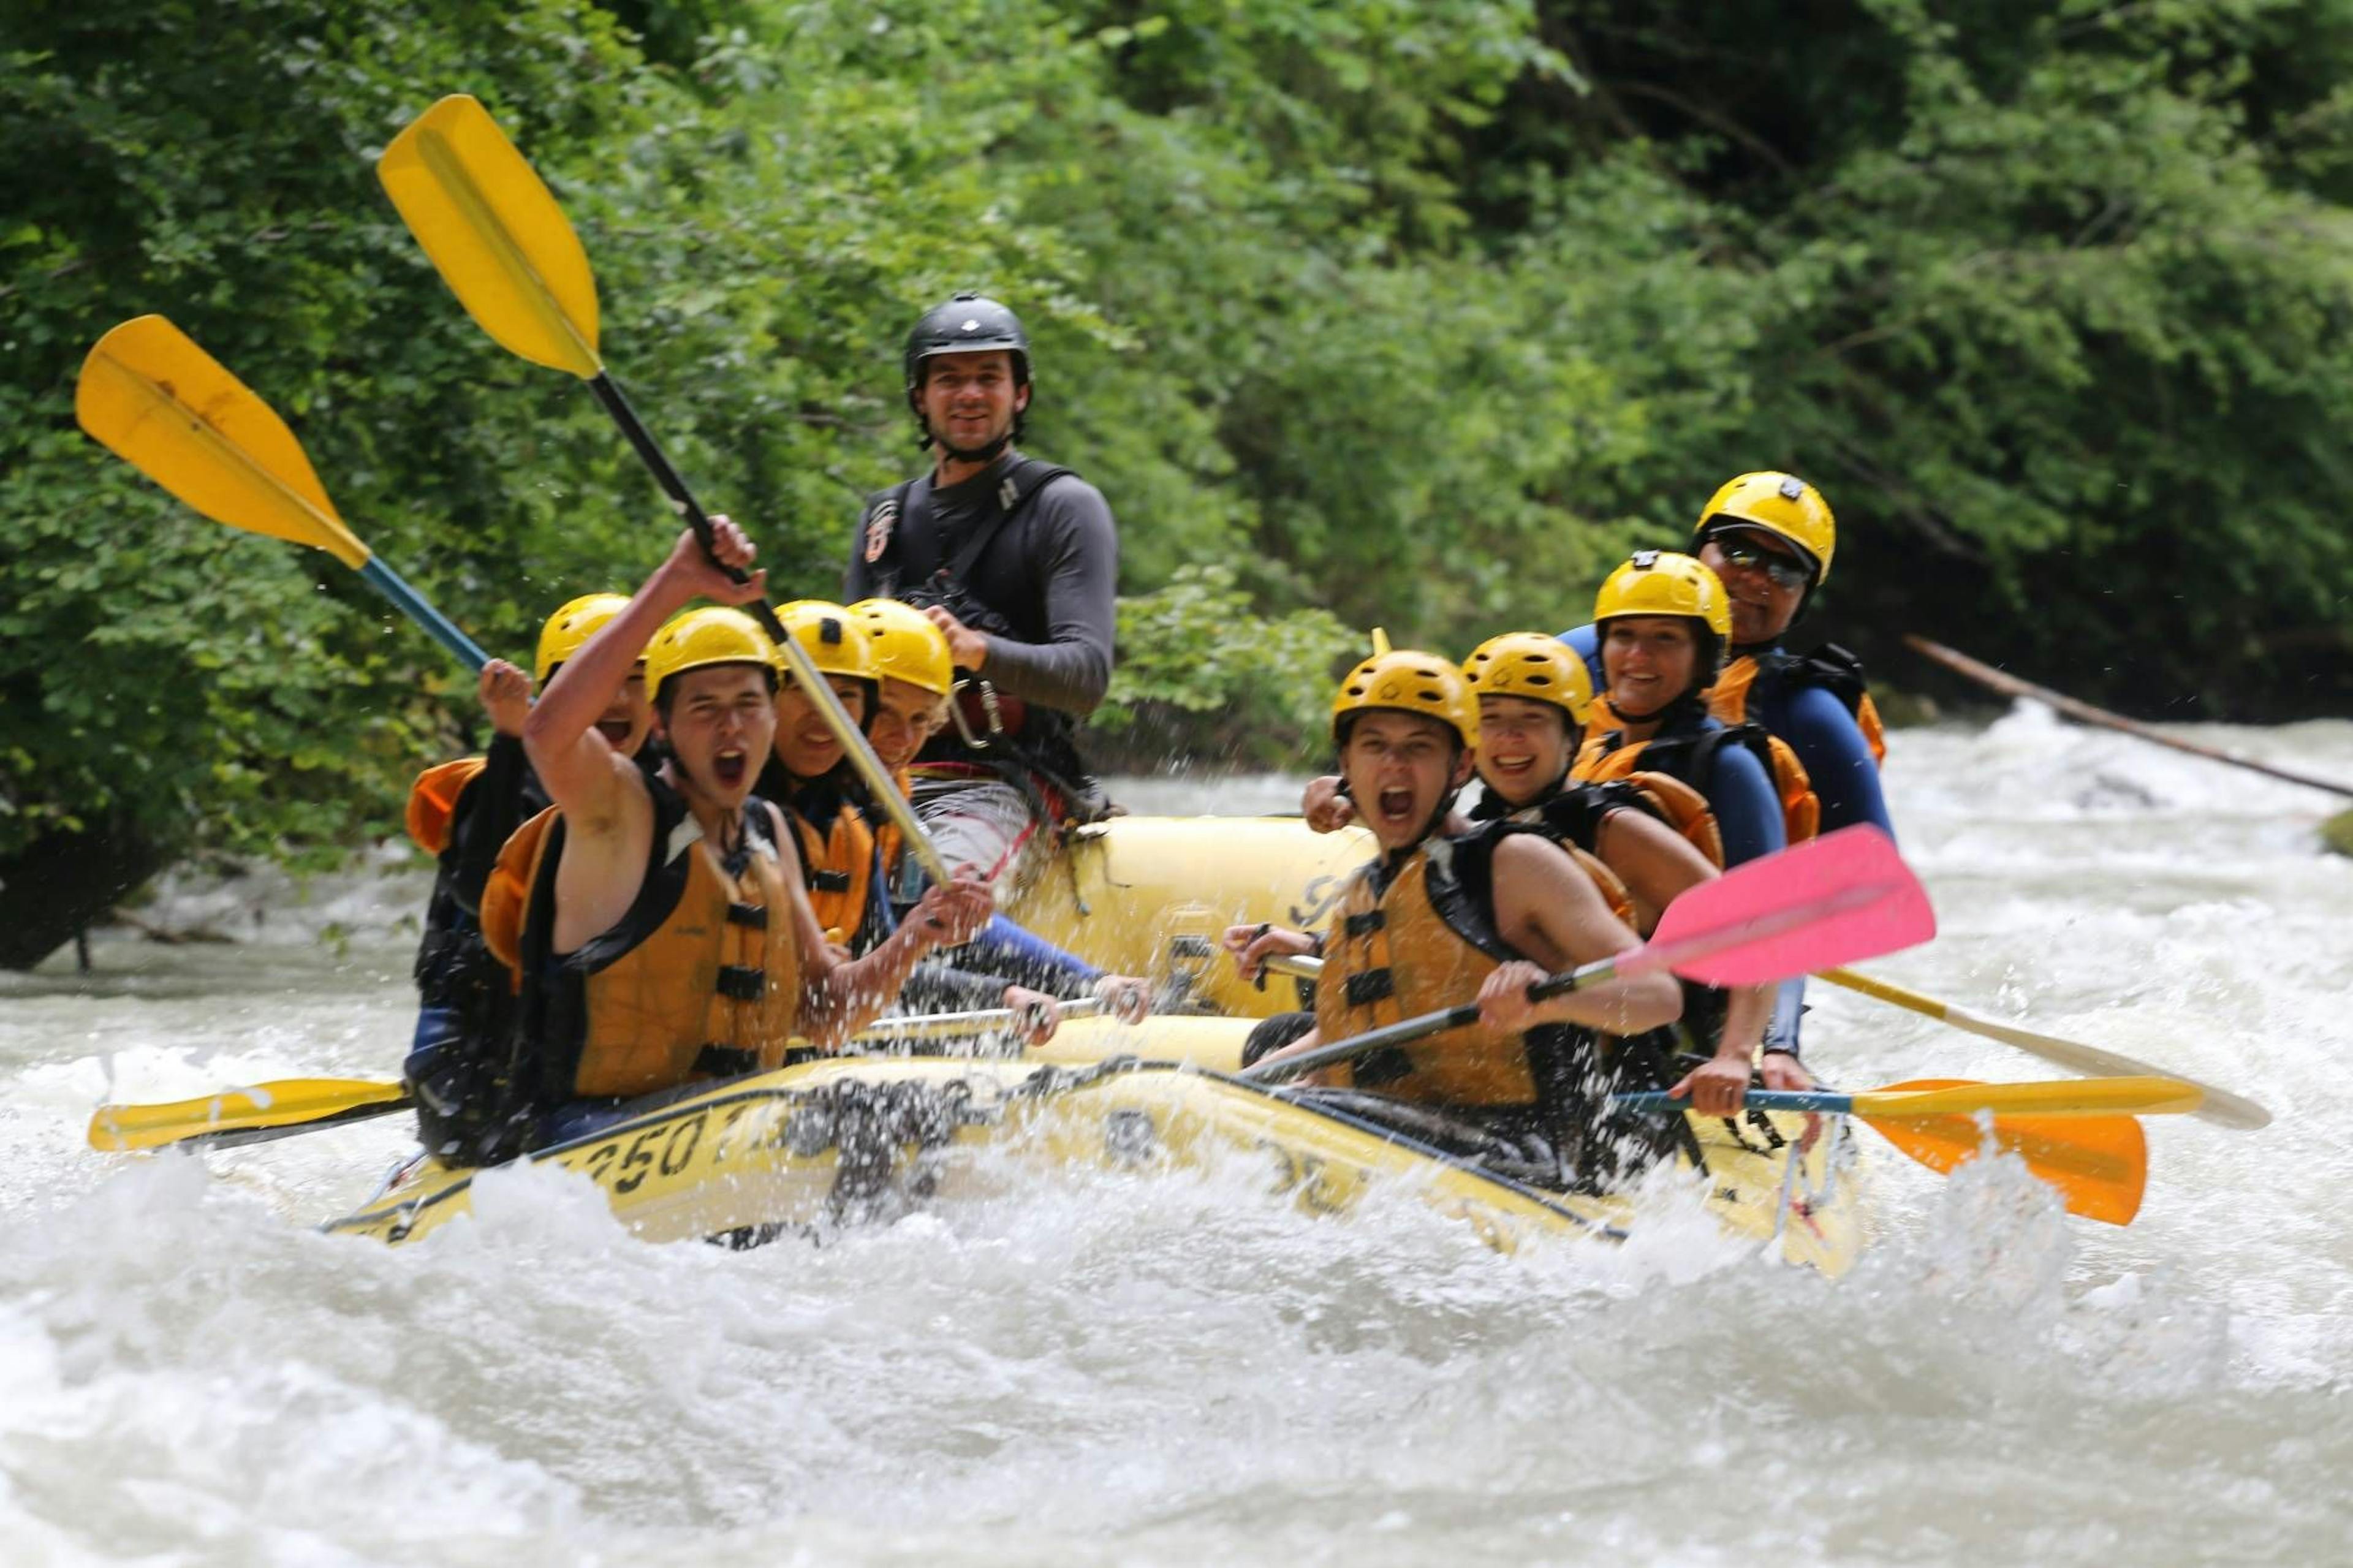 Rafting Simme